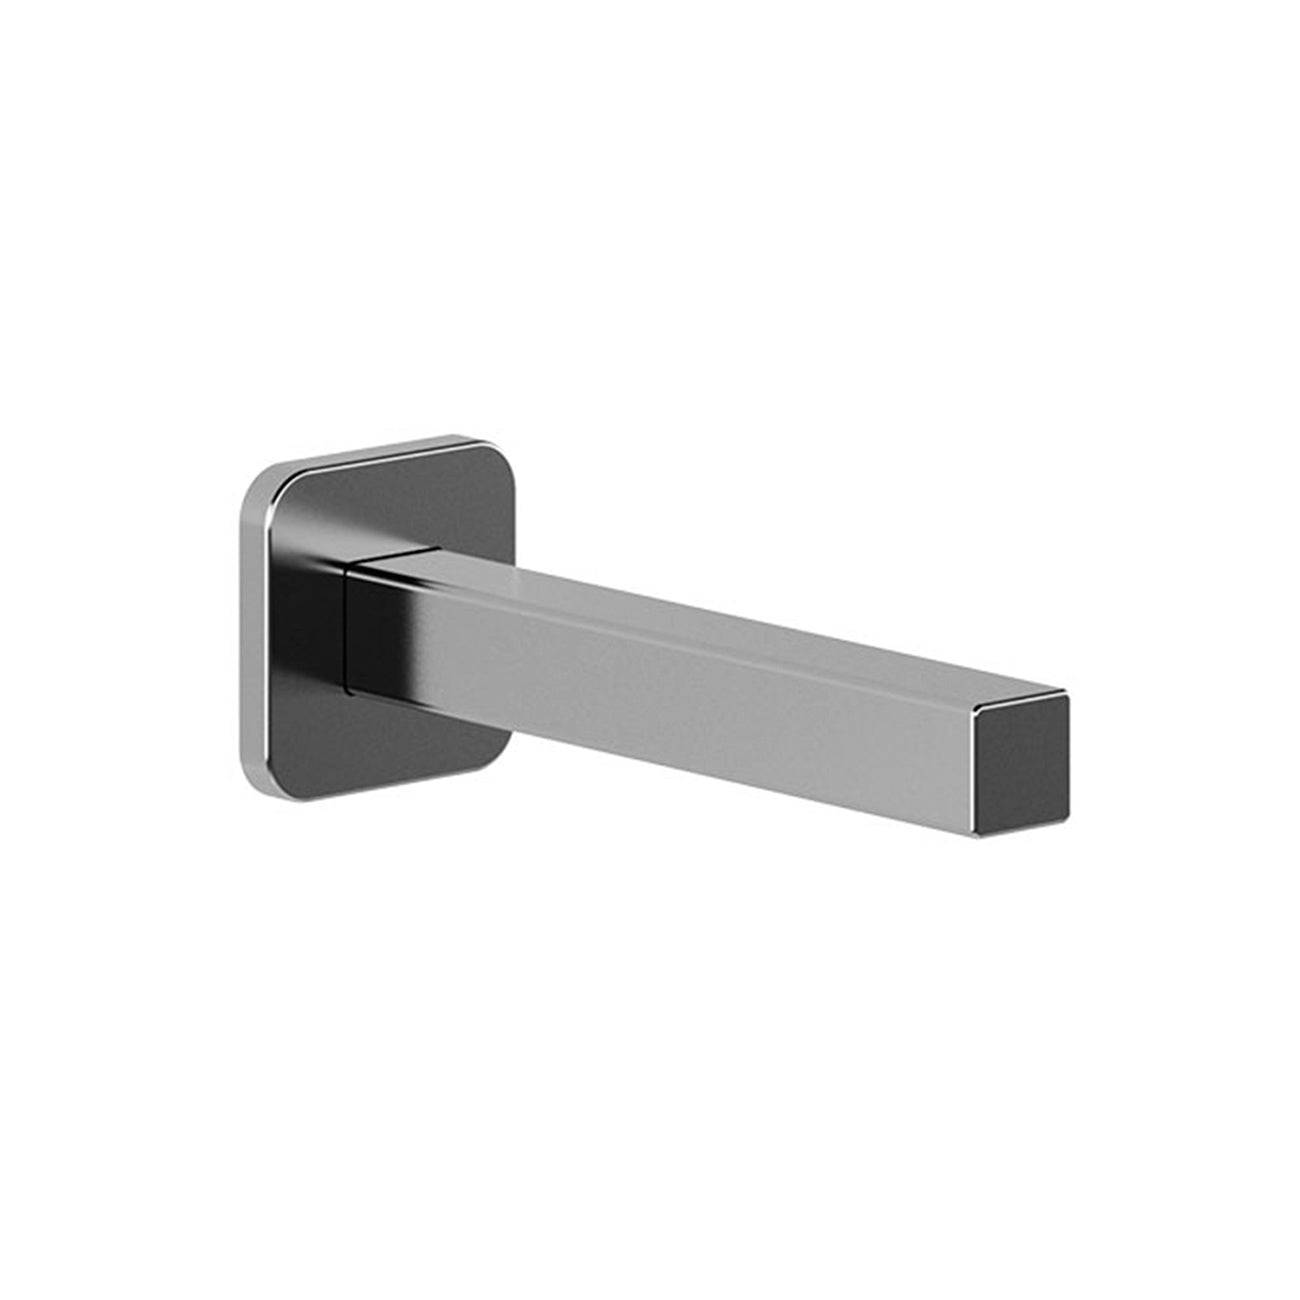 Kalia ½" Cooper "Slip Fit" Inlet or Male Water ½ NPT with 76mm (3'') Adjustment Square Tub Spout- Chrome